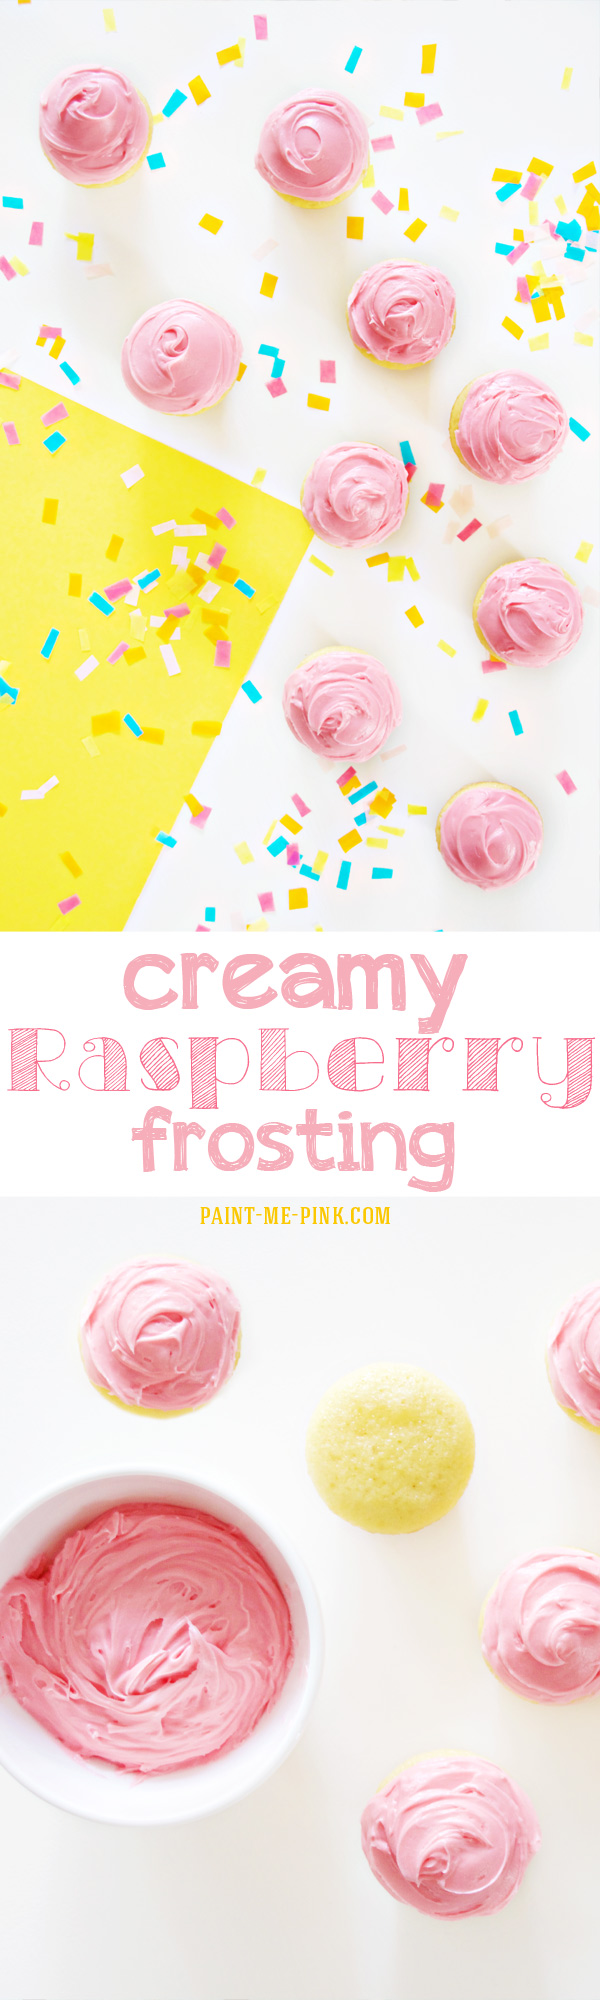 Creamy Raspberry Frosting! Paint Me Pink.com